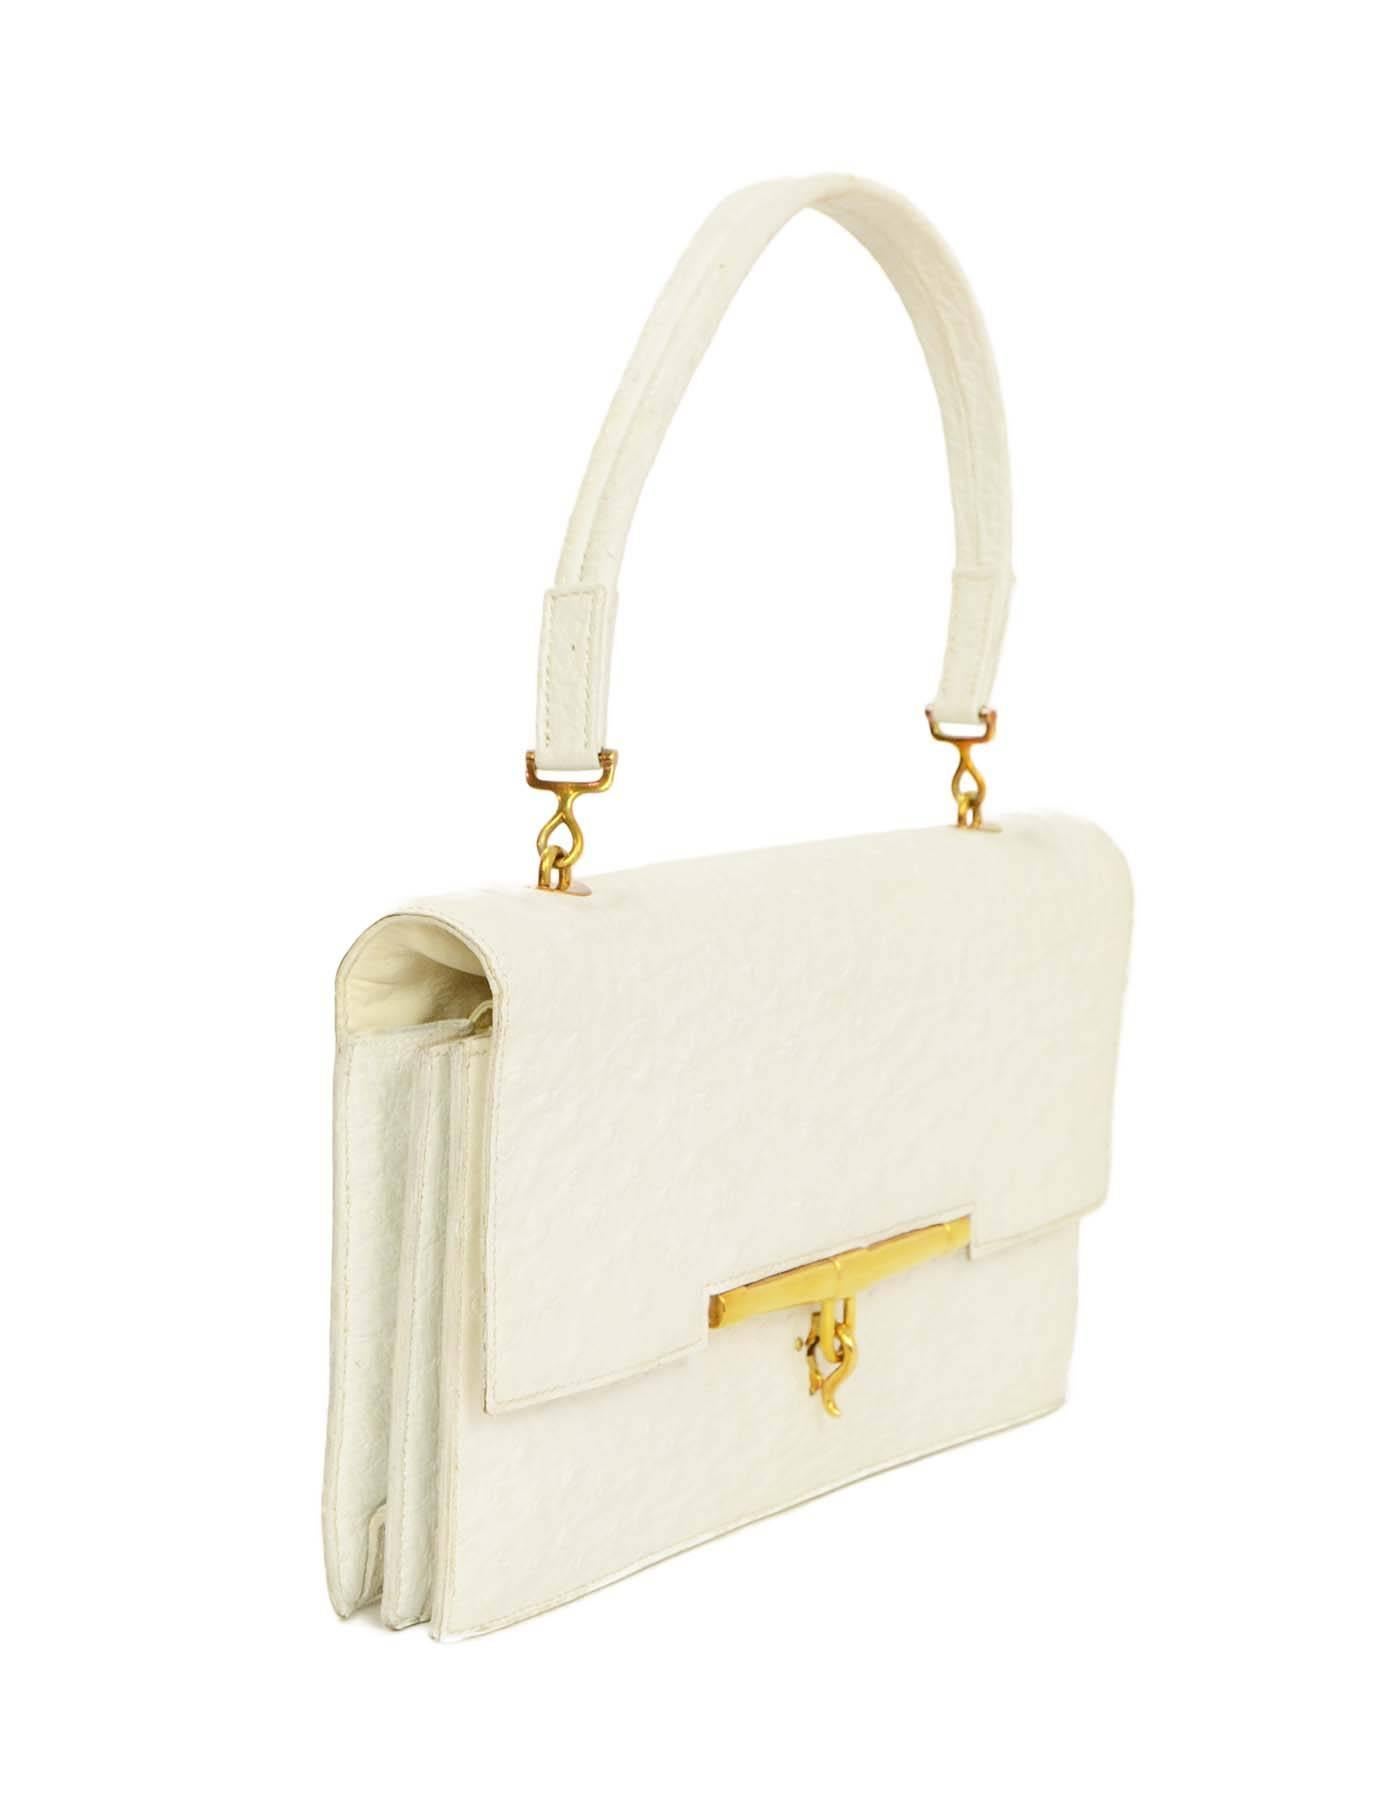 Hermes White Ostrich Piano Bag 
Made In: France
Color: White
Hardware: Goldtone
Materials: Ostrich skin
Lining: White leather
Closure/Opening: Flap top with hook lever
Exterior Pockets: None
Interior Pockets: Double gusseted with two large